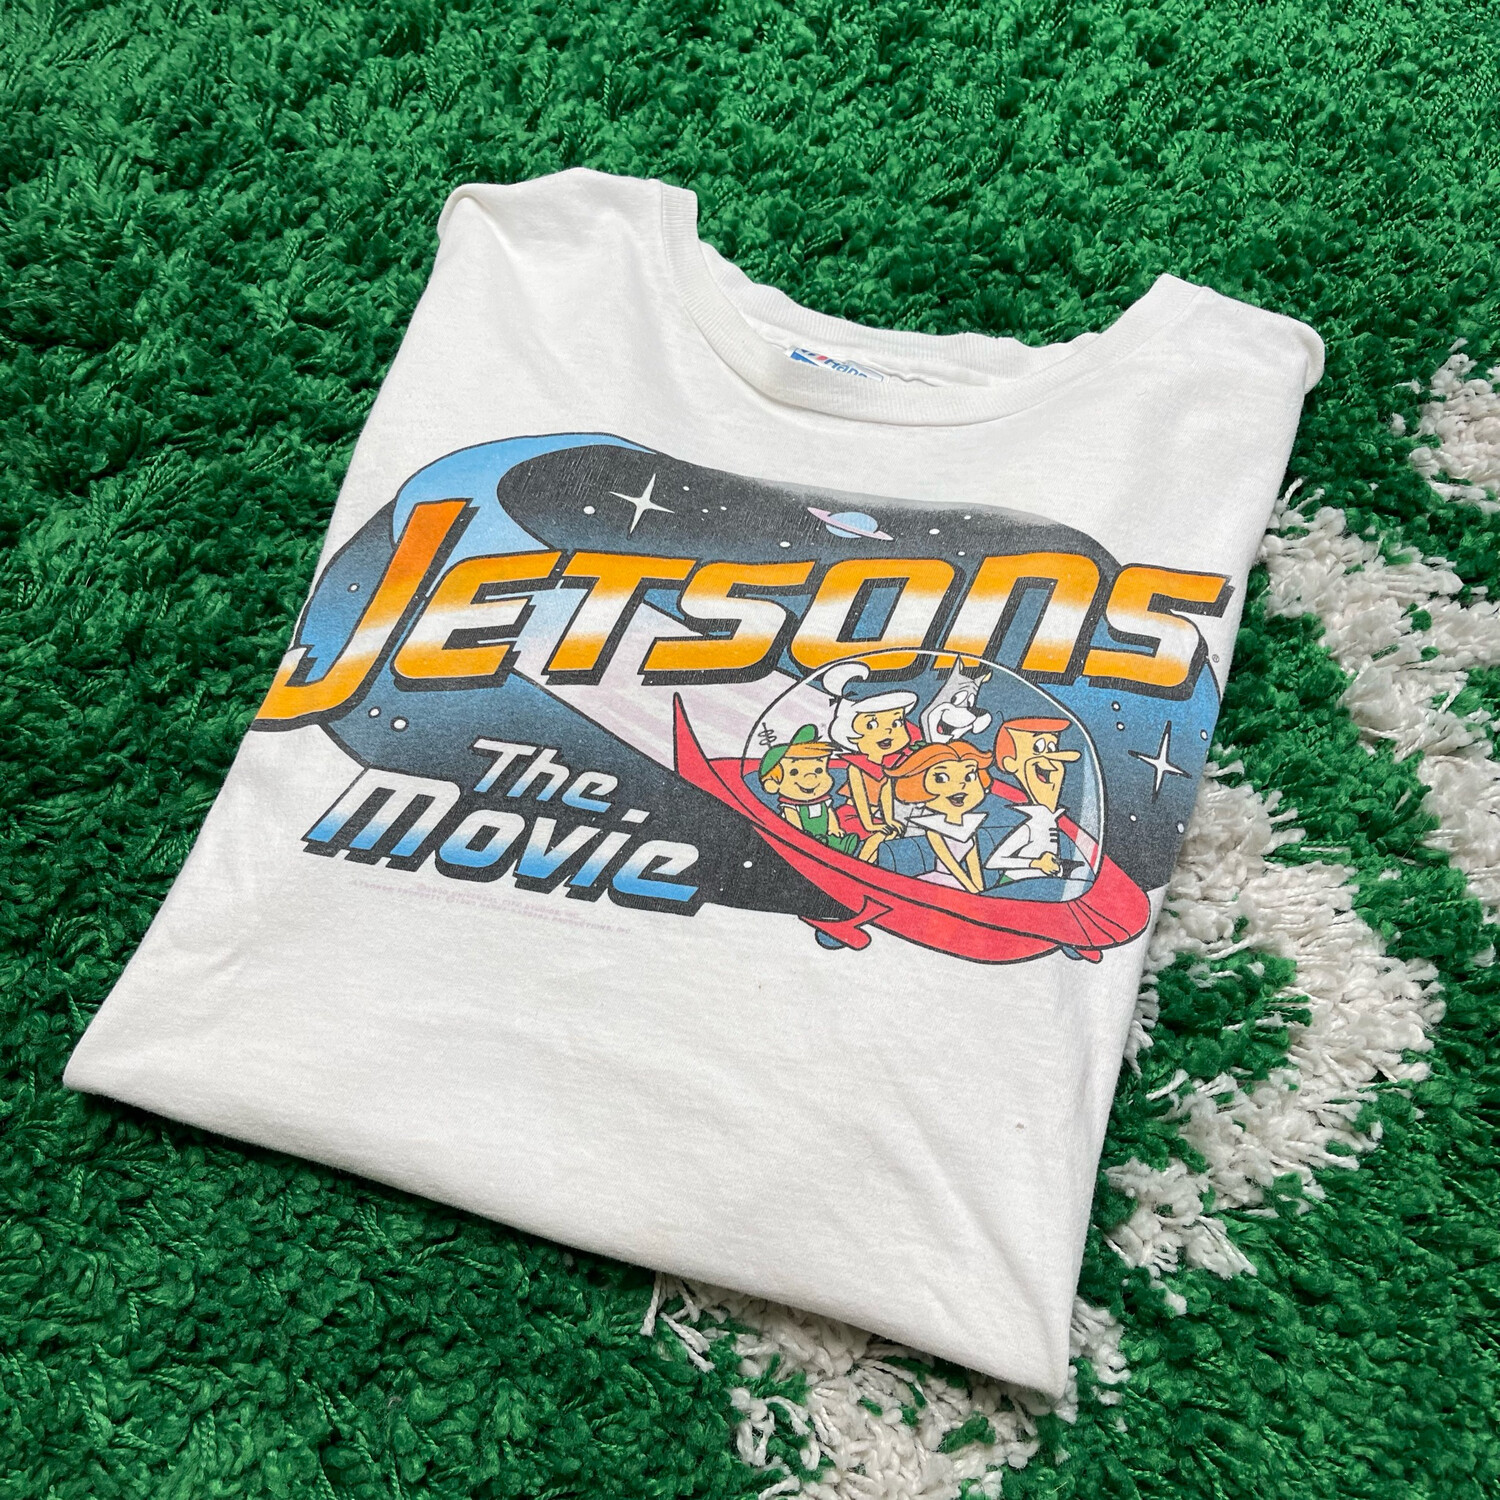 Jetsons The Movie 1990 Size XL